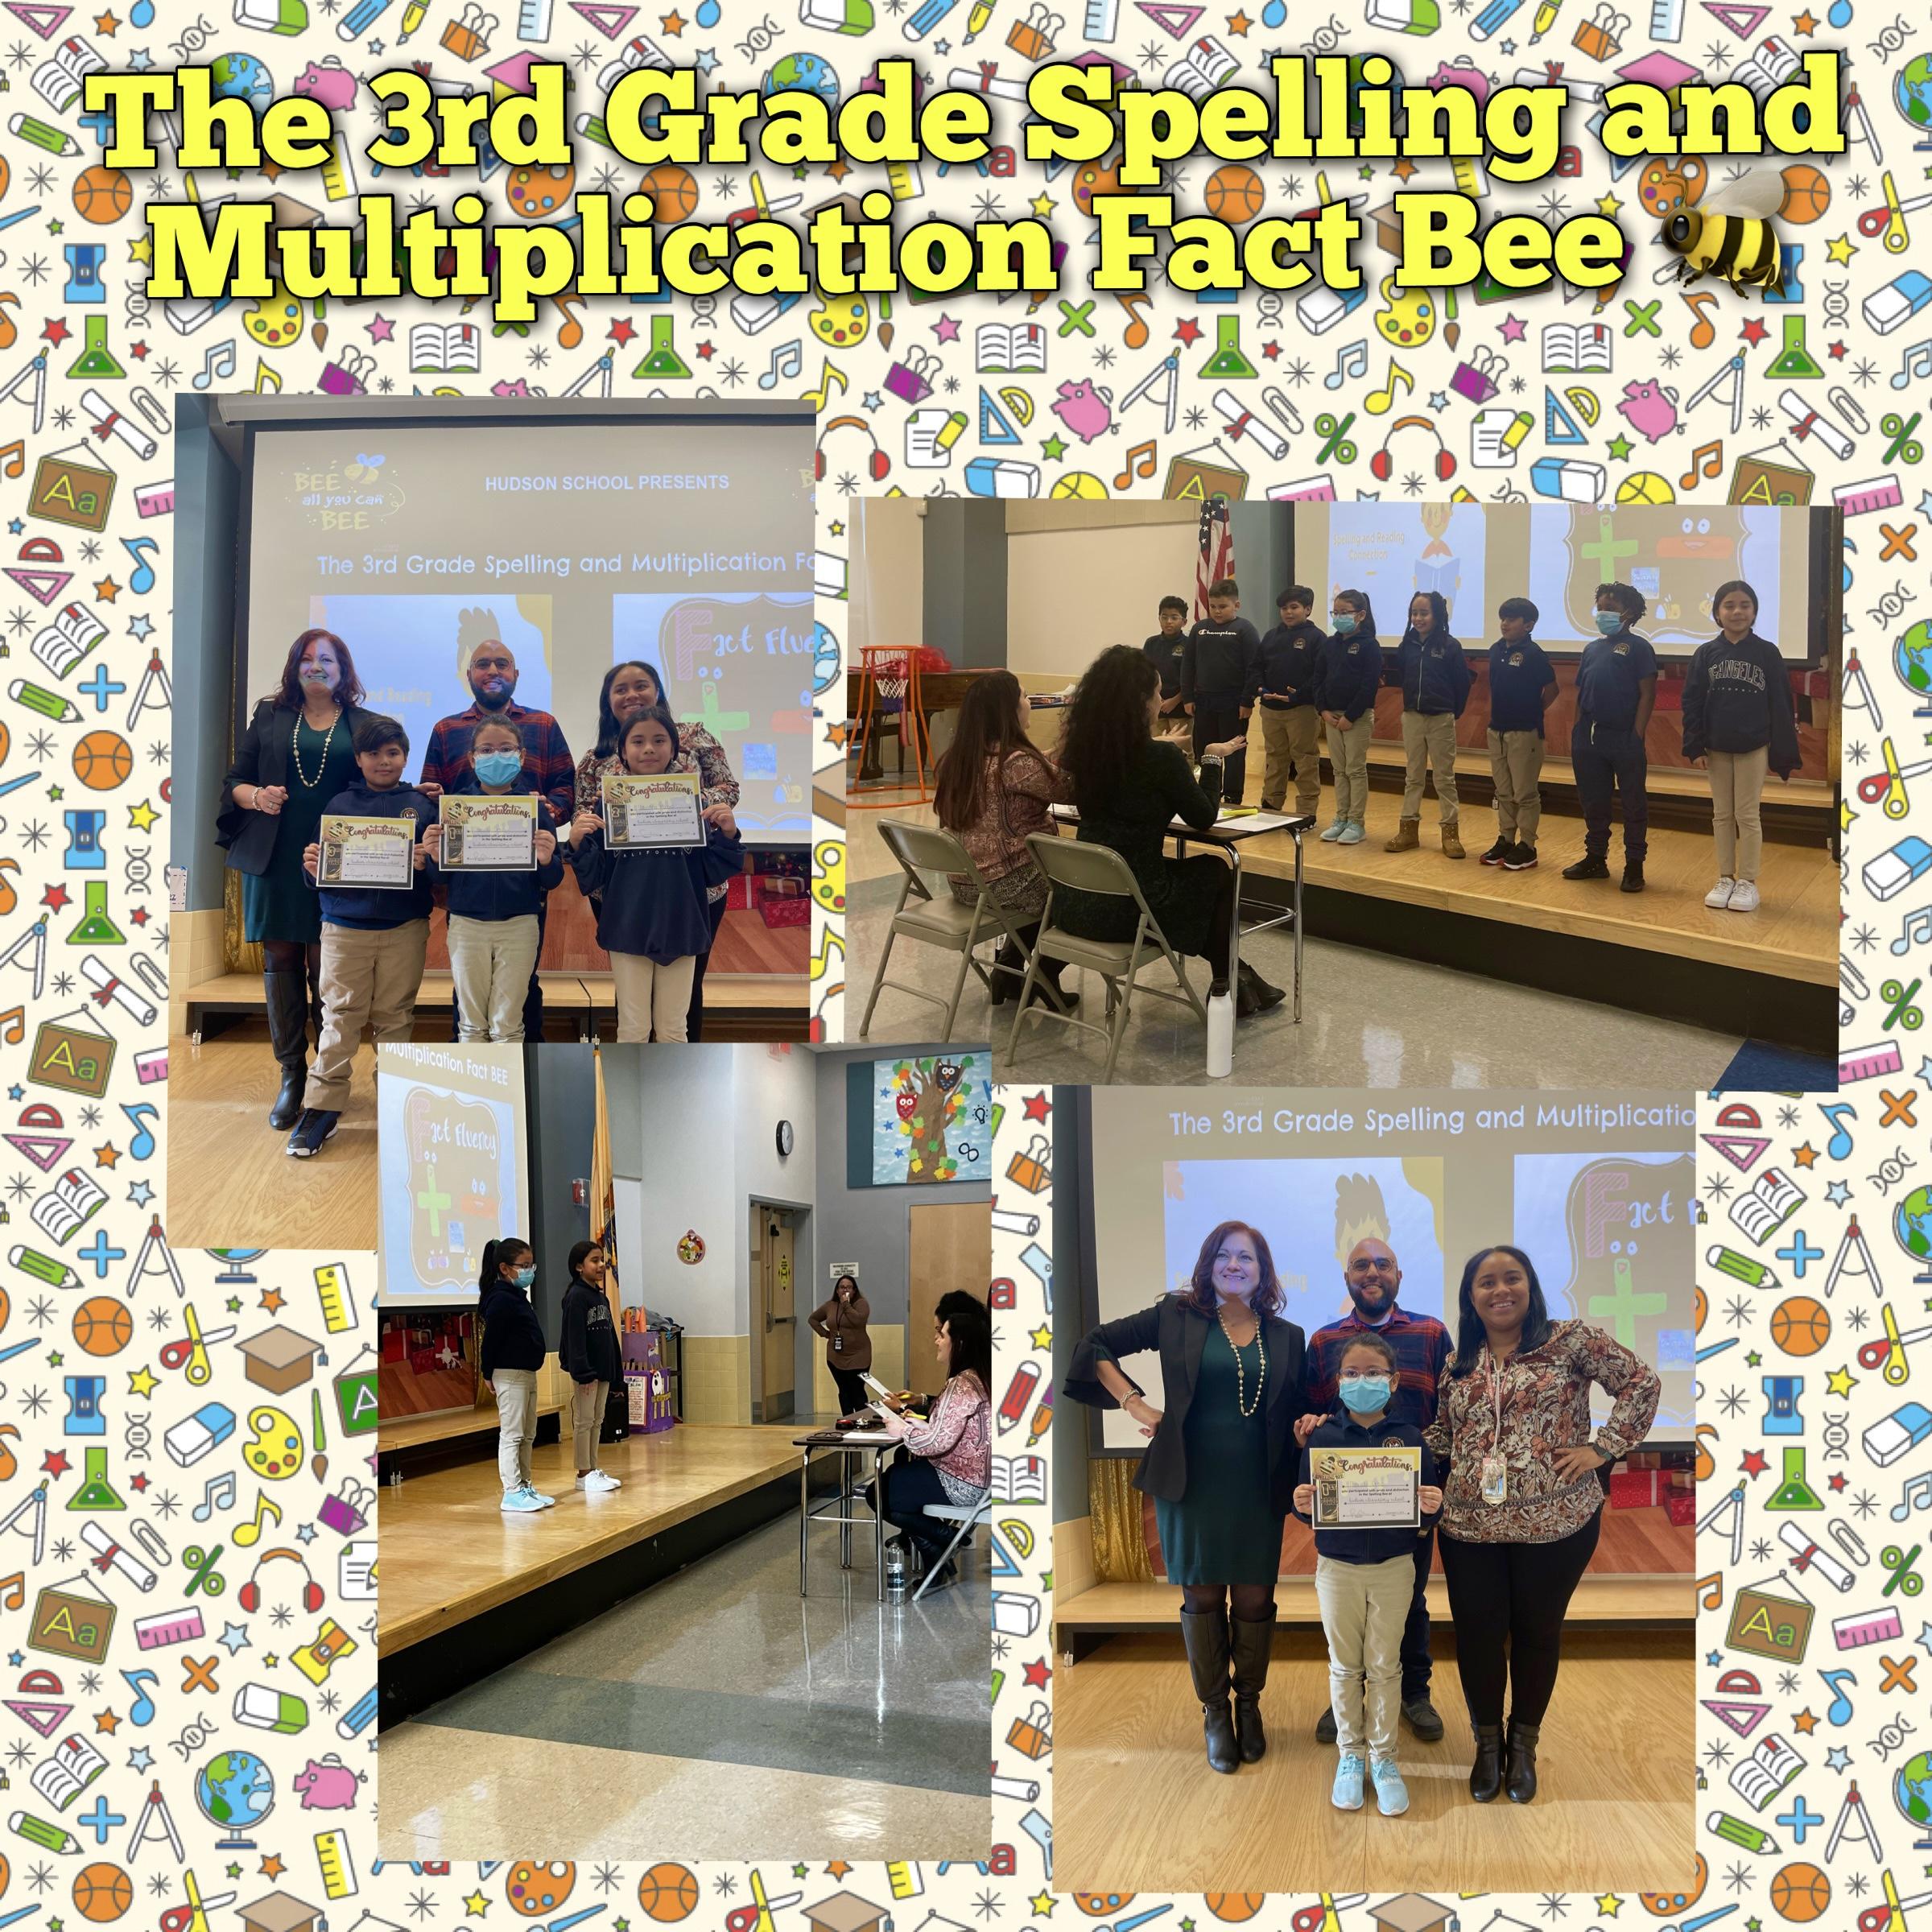 The 3rd Grade Spelling and Multiplication Fact Bee